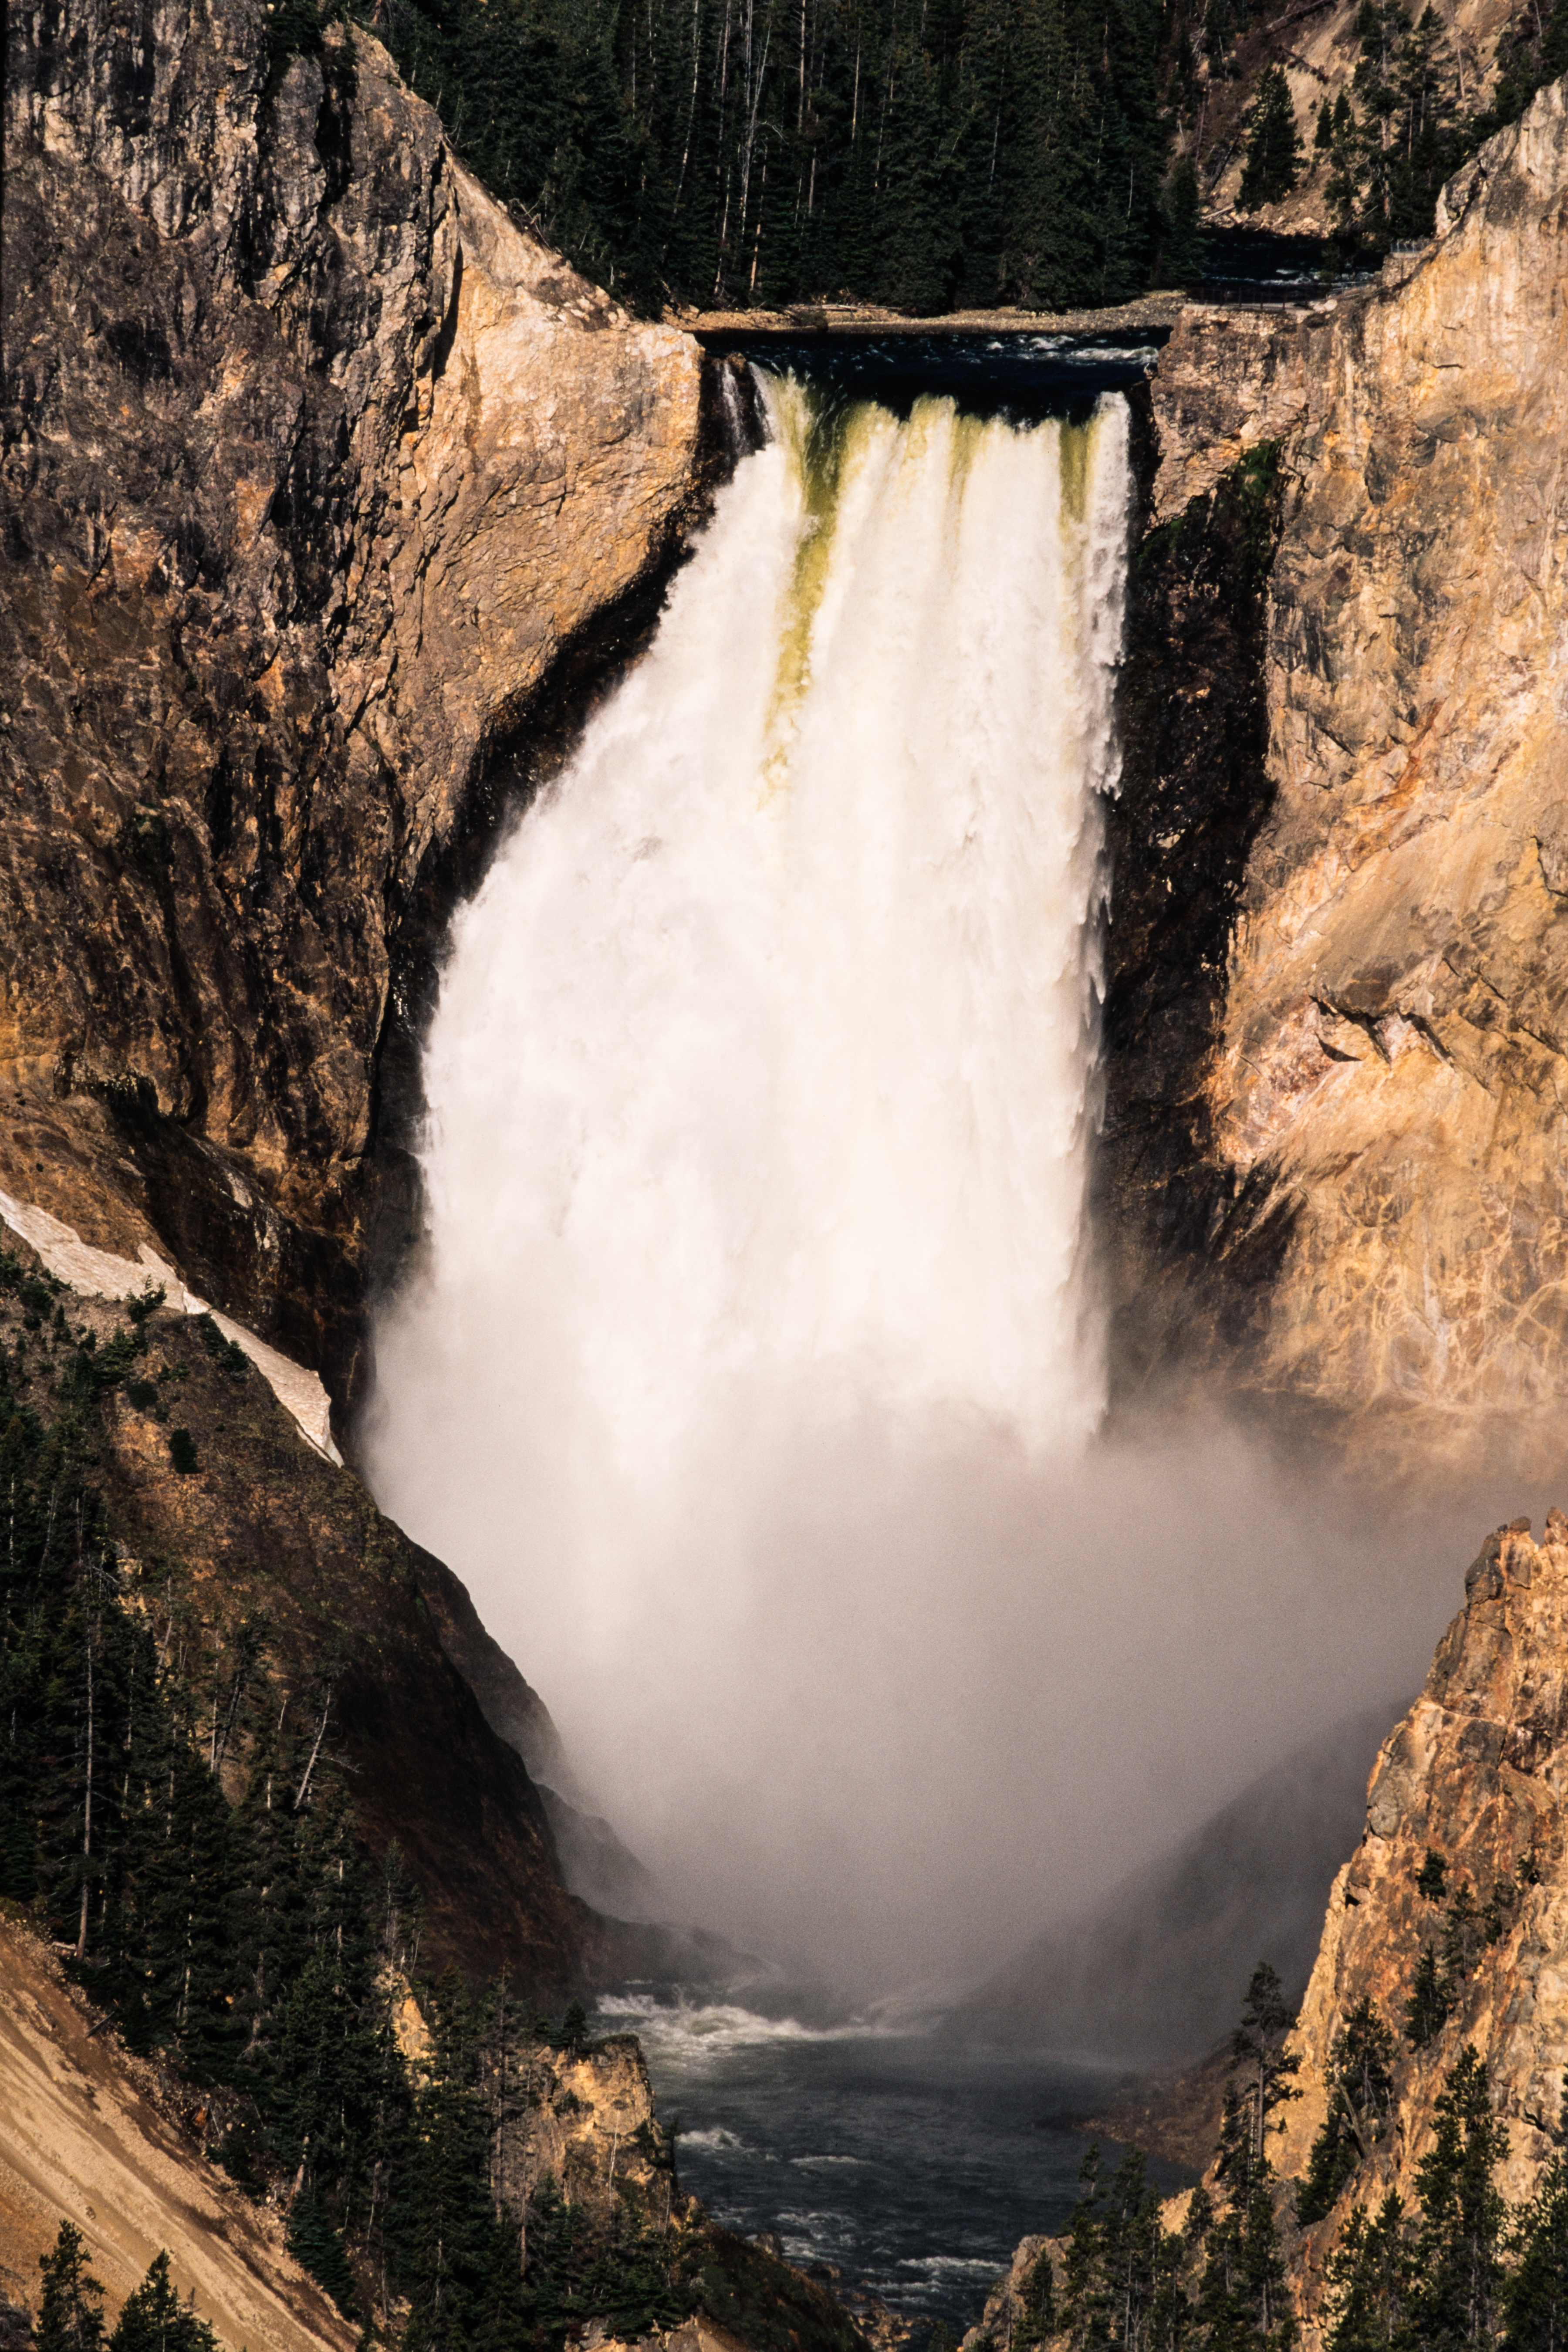 The Lower Falls in the Grand Canyon of the Yellowstone River in Yellowstone National Park in Wyoming, USA.